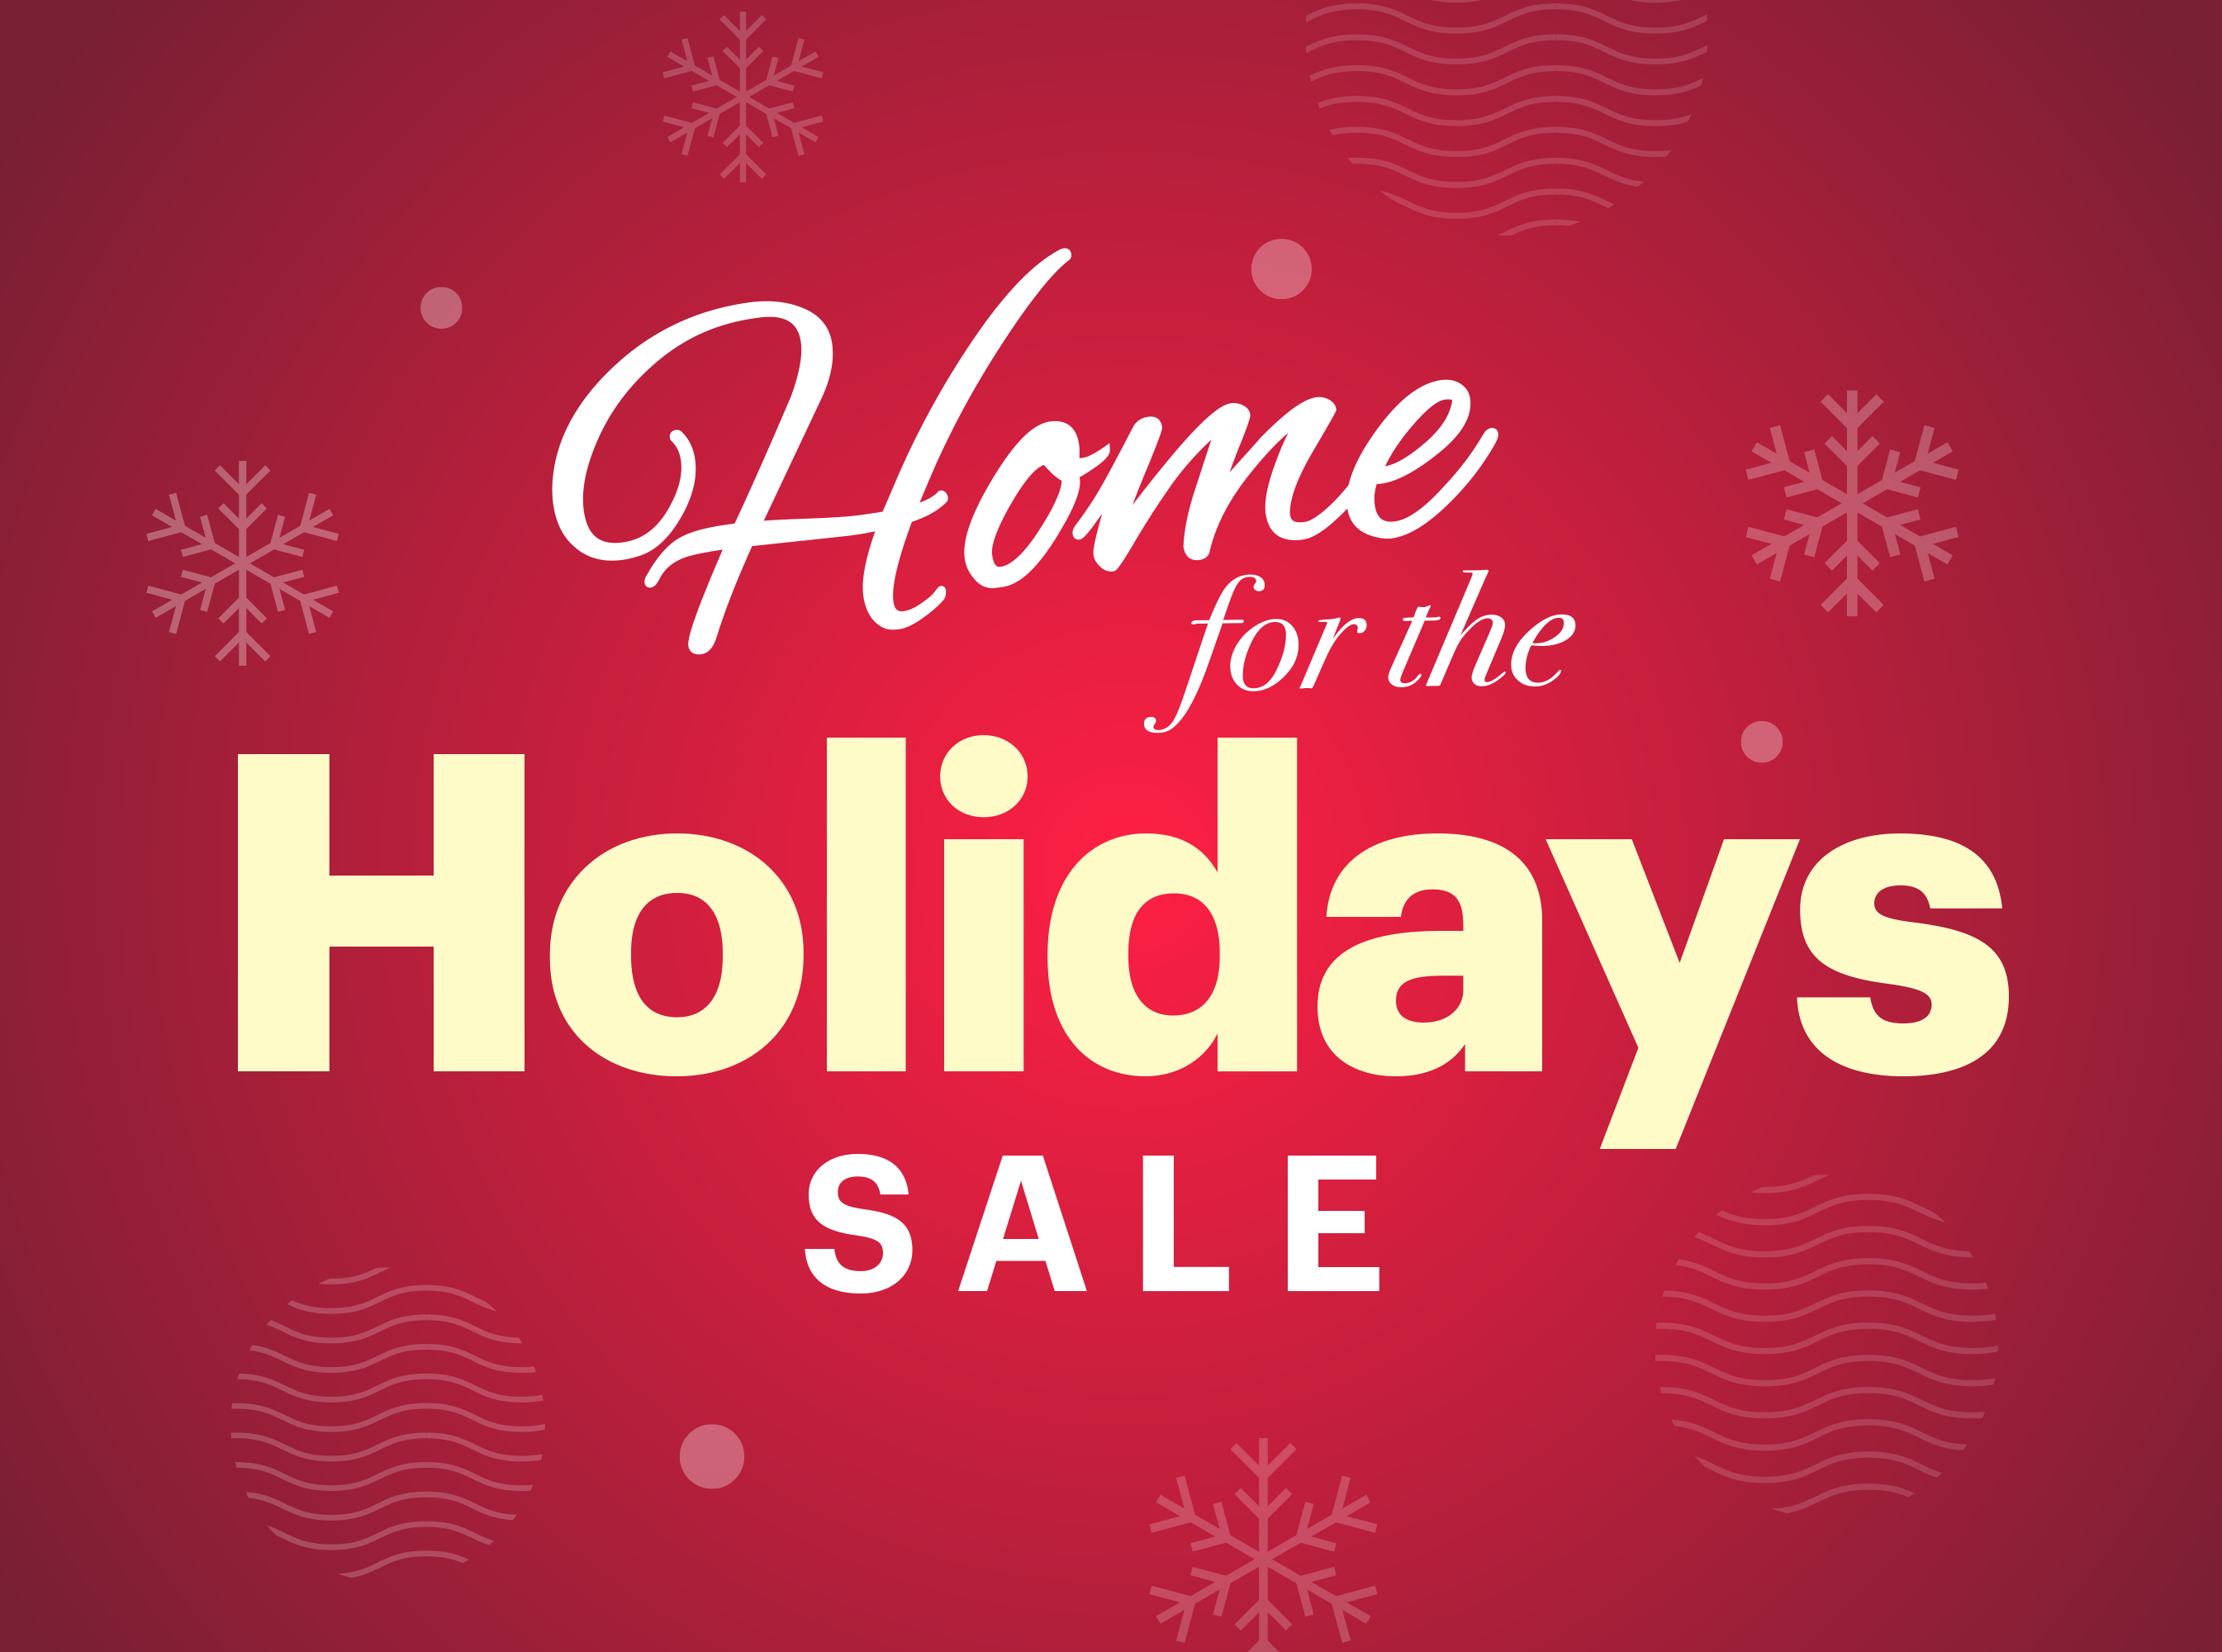 A graphic design campaign lockup for home for the holidays sale